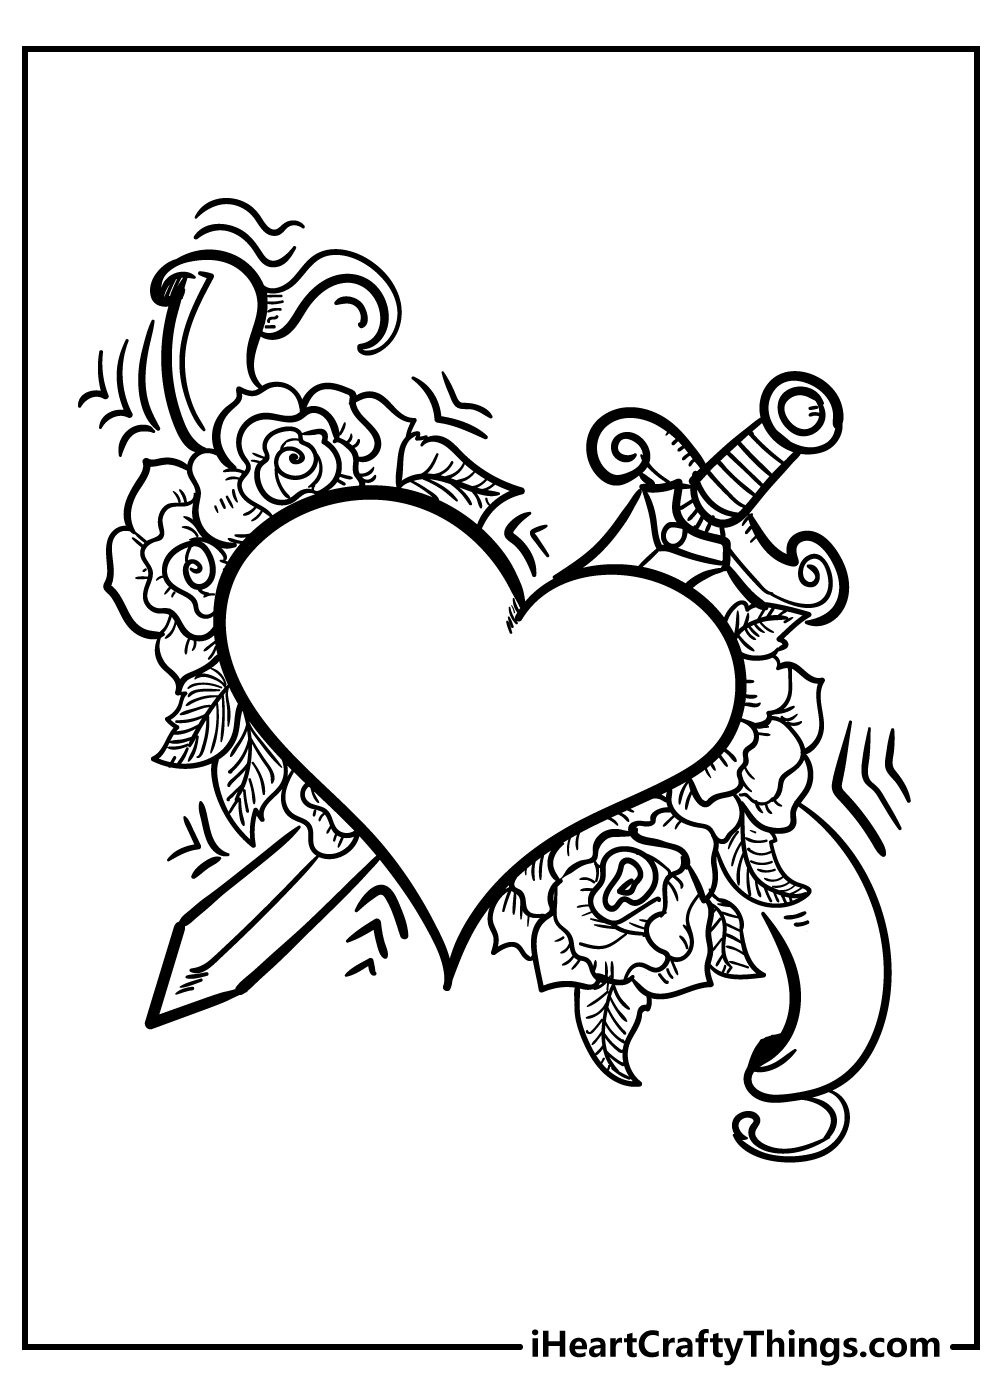 heart coloring sheet for children free download